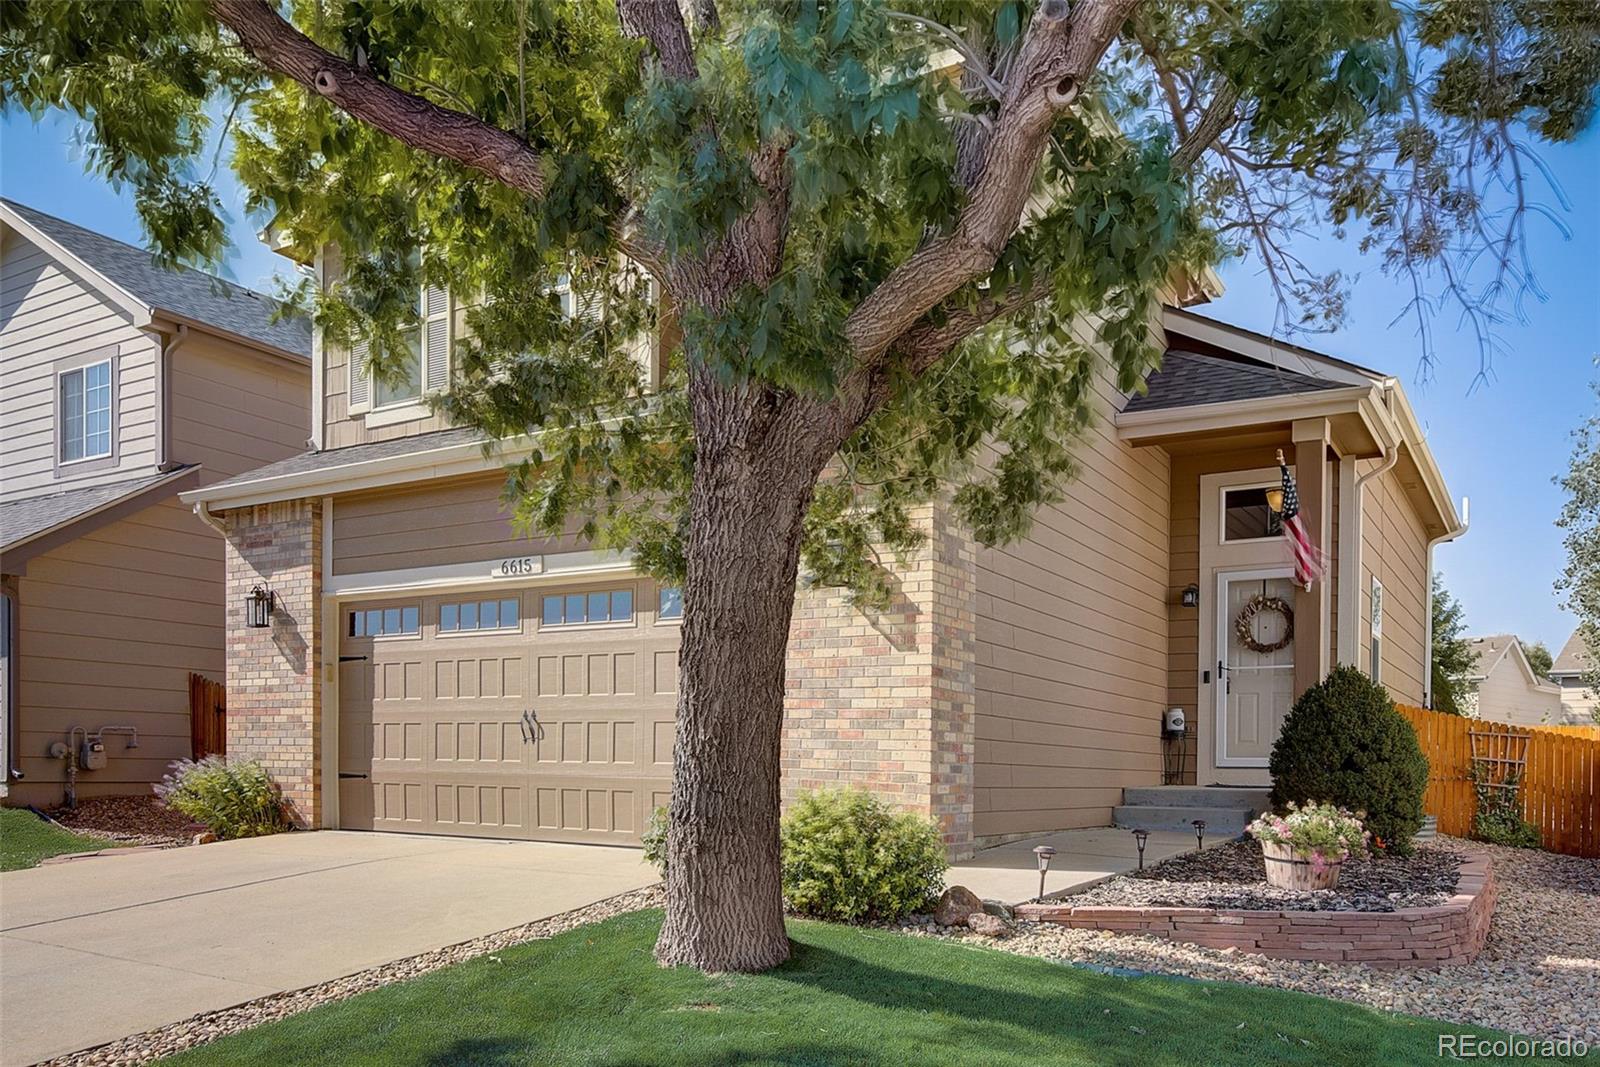 6615  st vrain ranch boulevard, Firestone sold home. Closed on 2024-01-04 for $525,000.